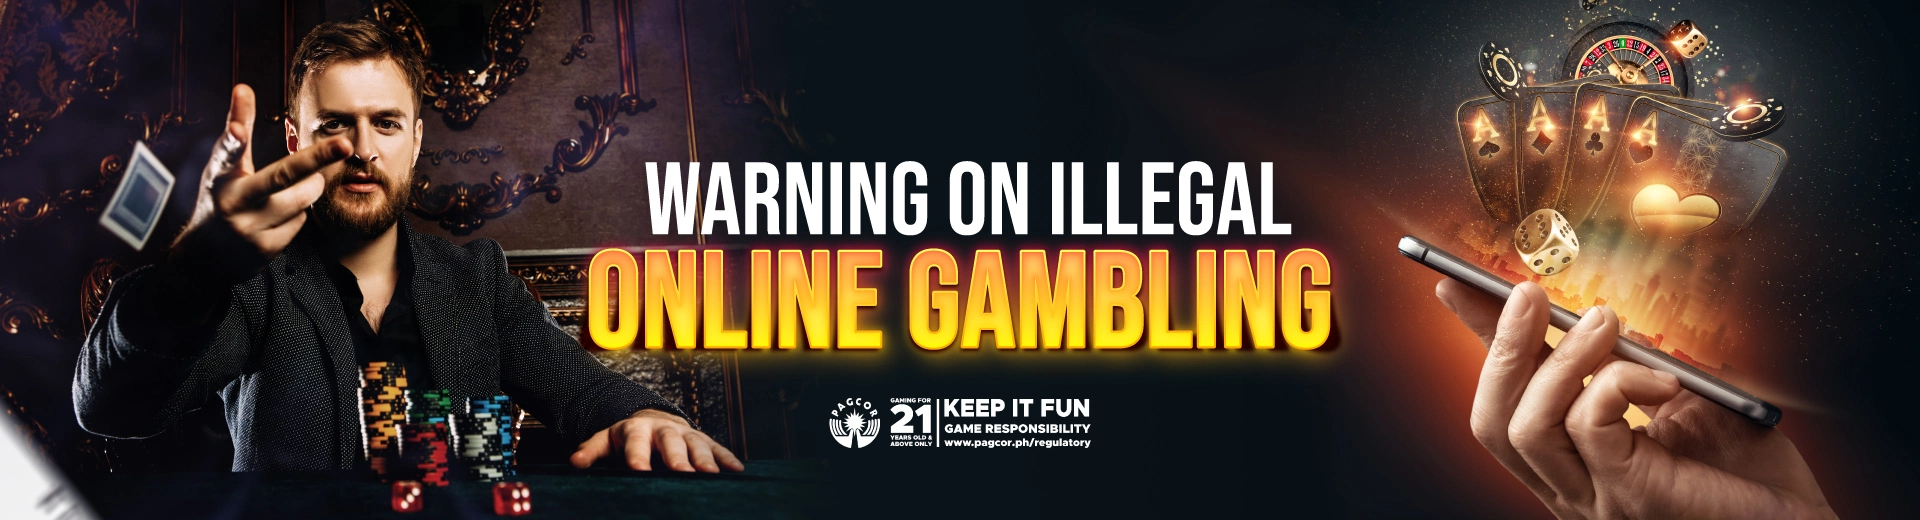 PAGCOR Warns Public Against Illegal Online Gambling